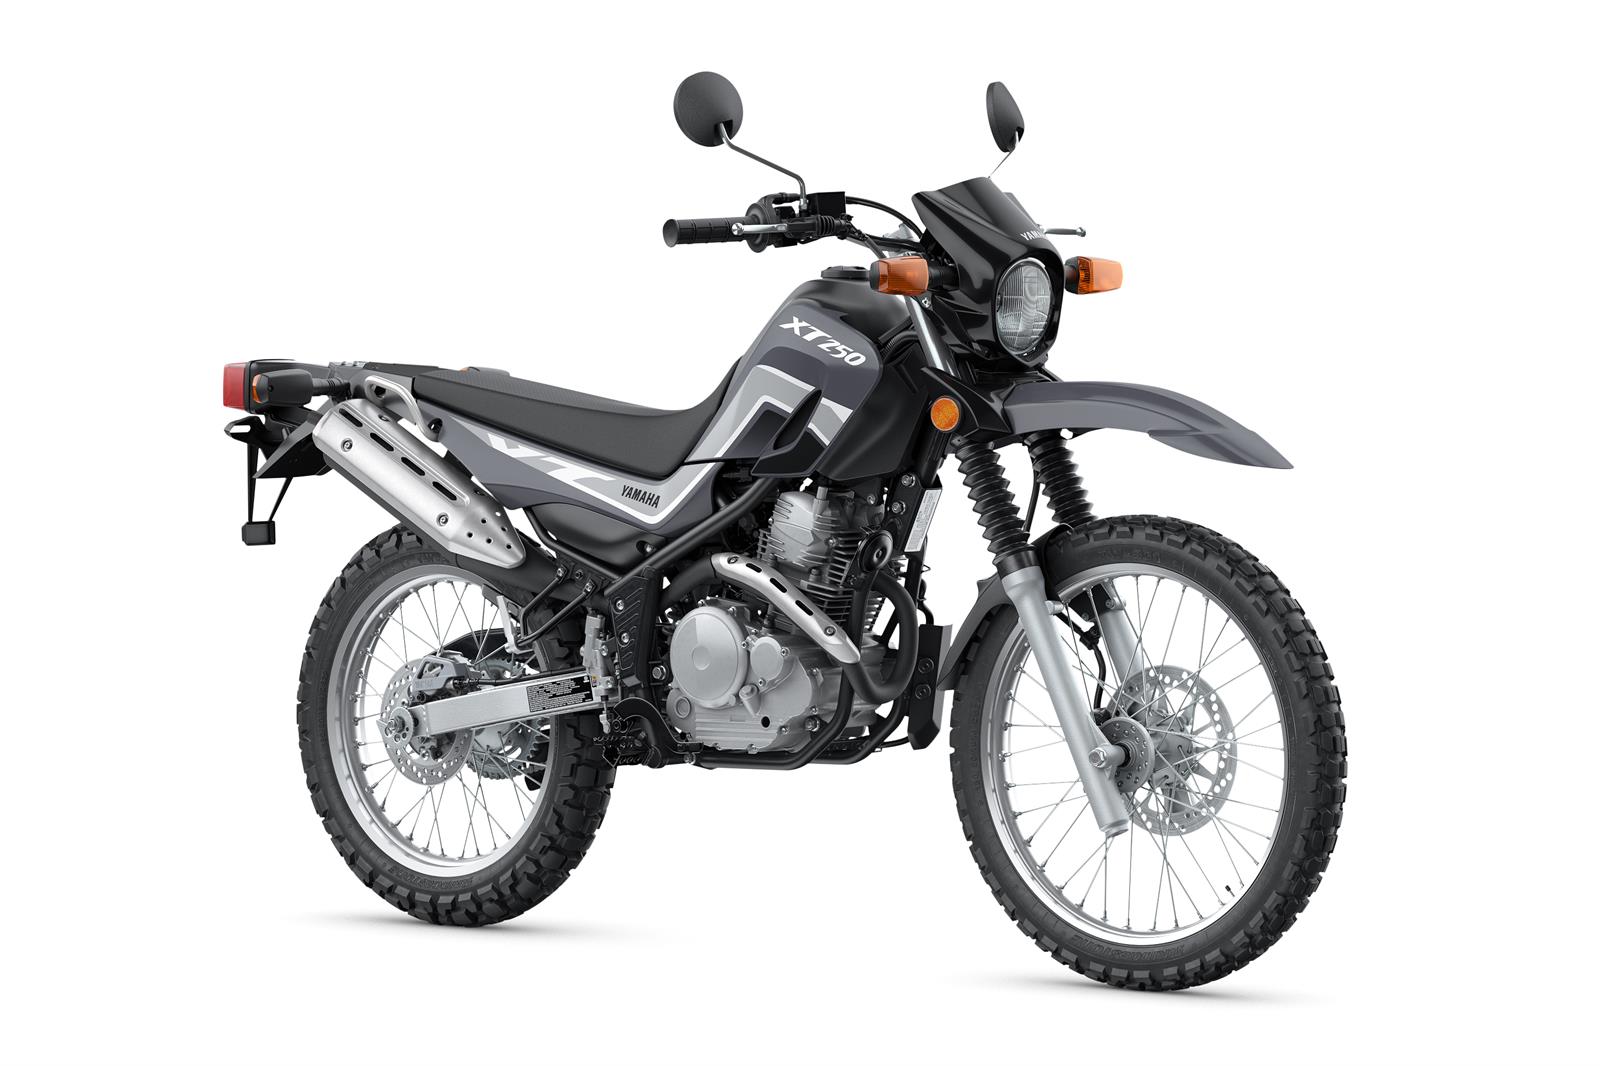 2023 Yamaha XT - 250 for sale in the Pompano Beach, FL area. Get the best drive out price on 2023 Yamaha XT - 250 and compare.